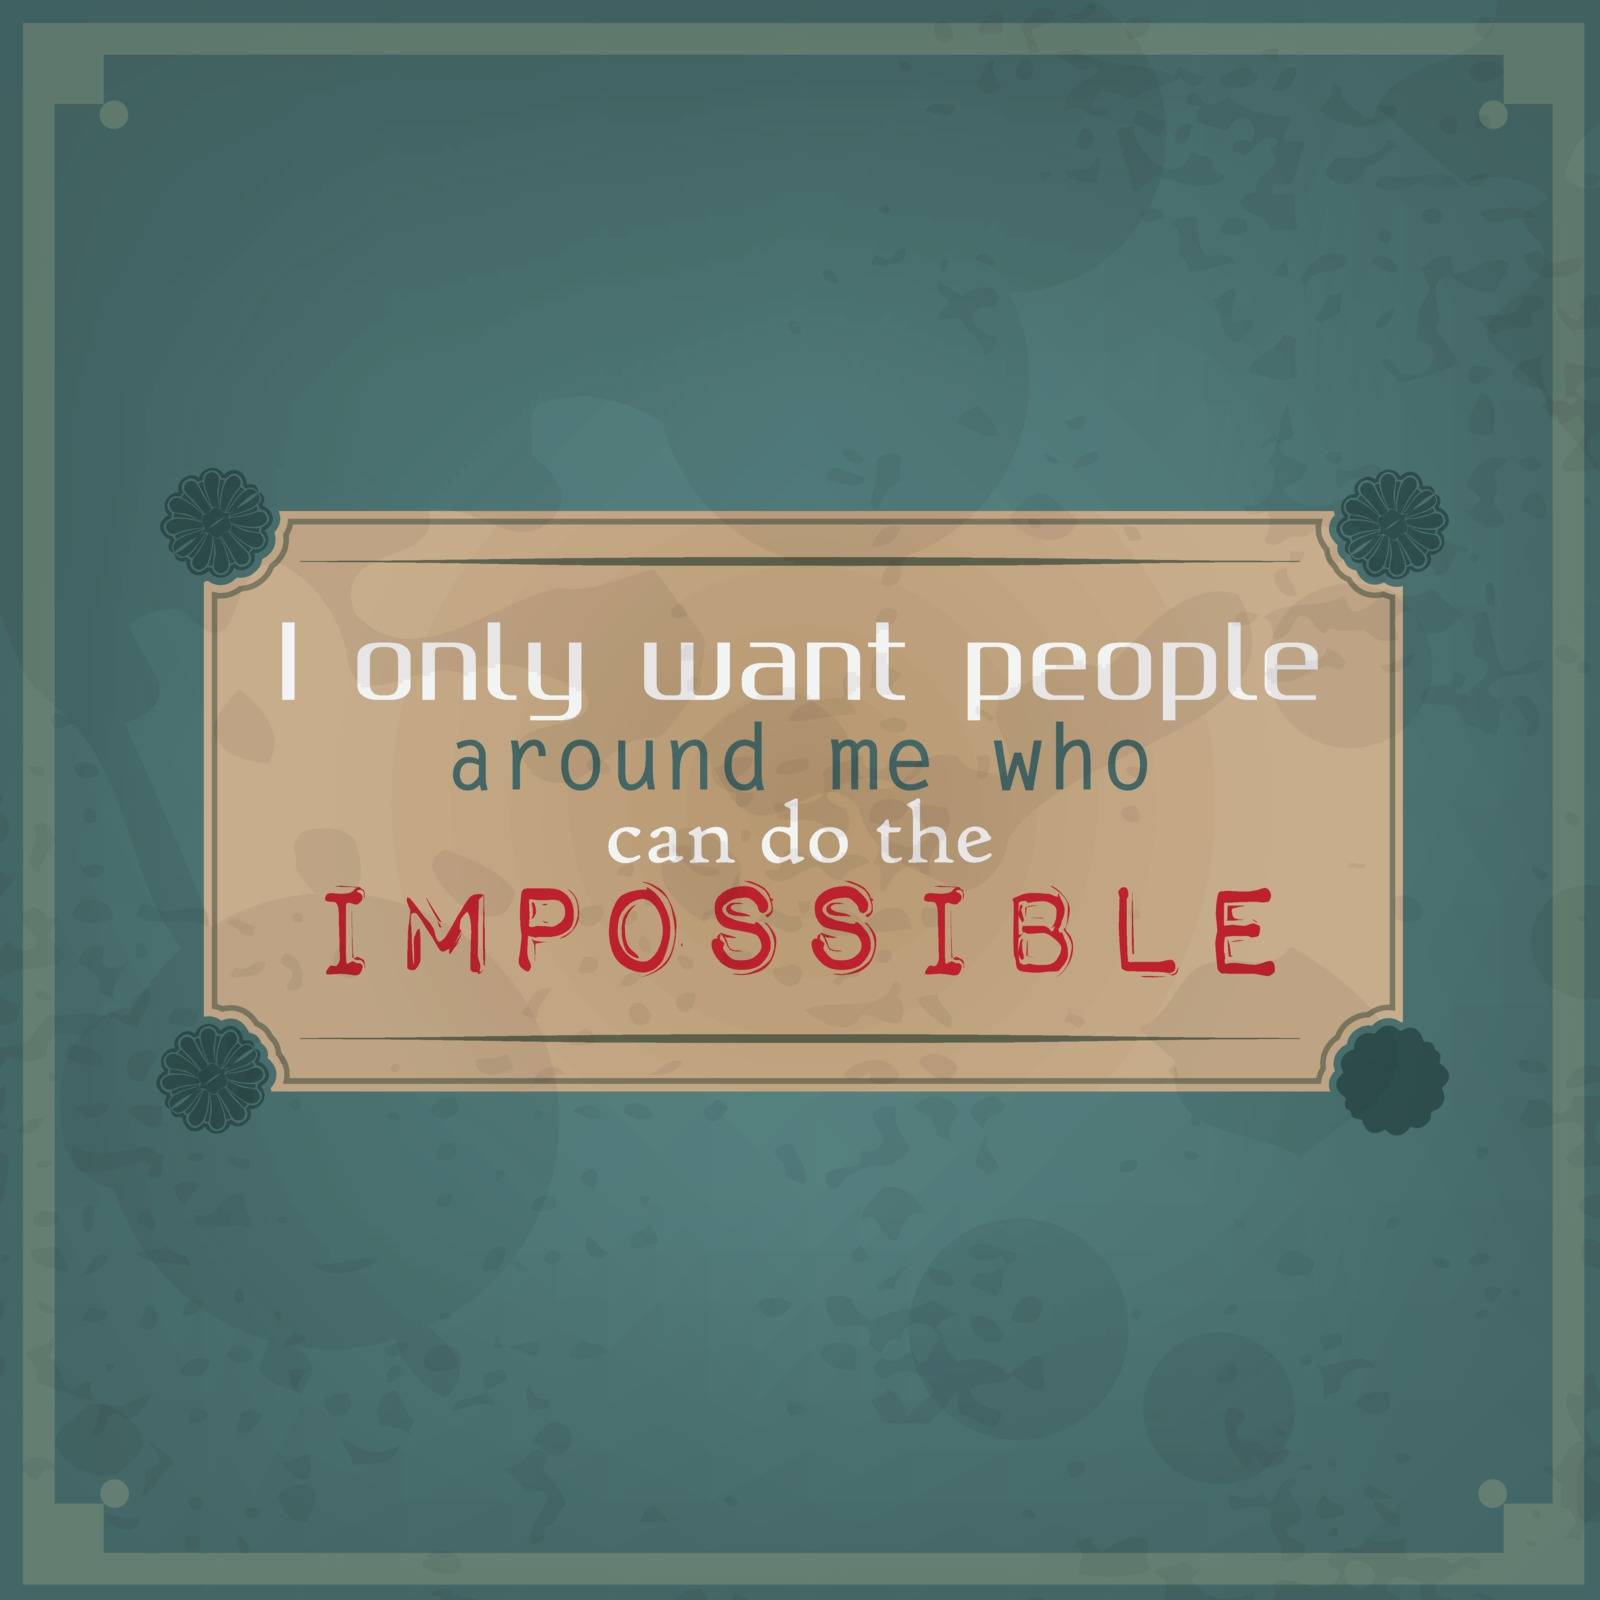 I only want people around me who can do the impossible. Motivational Poster. Retro Background